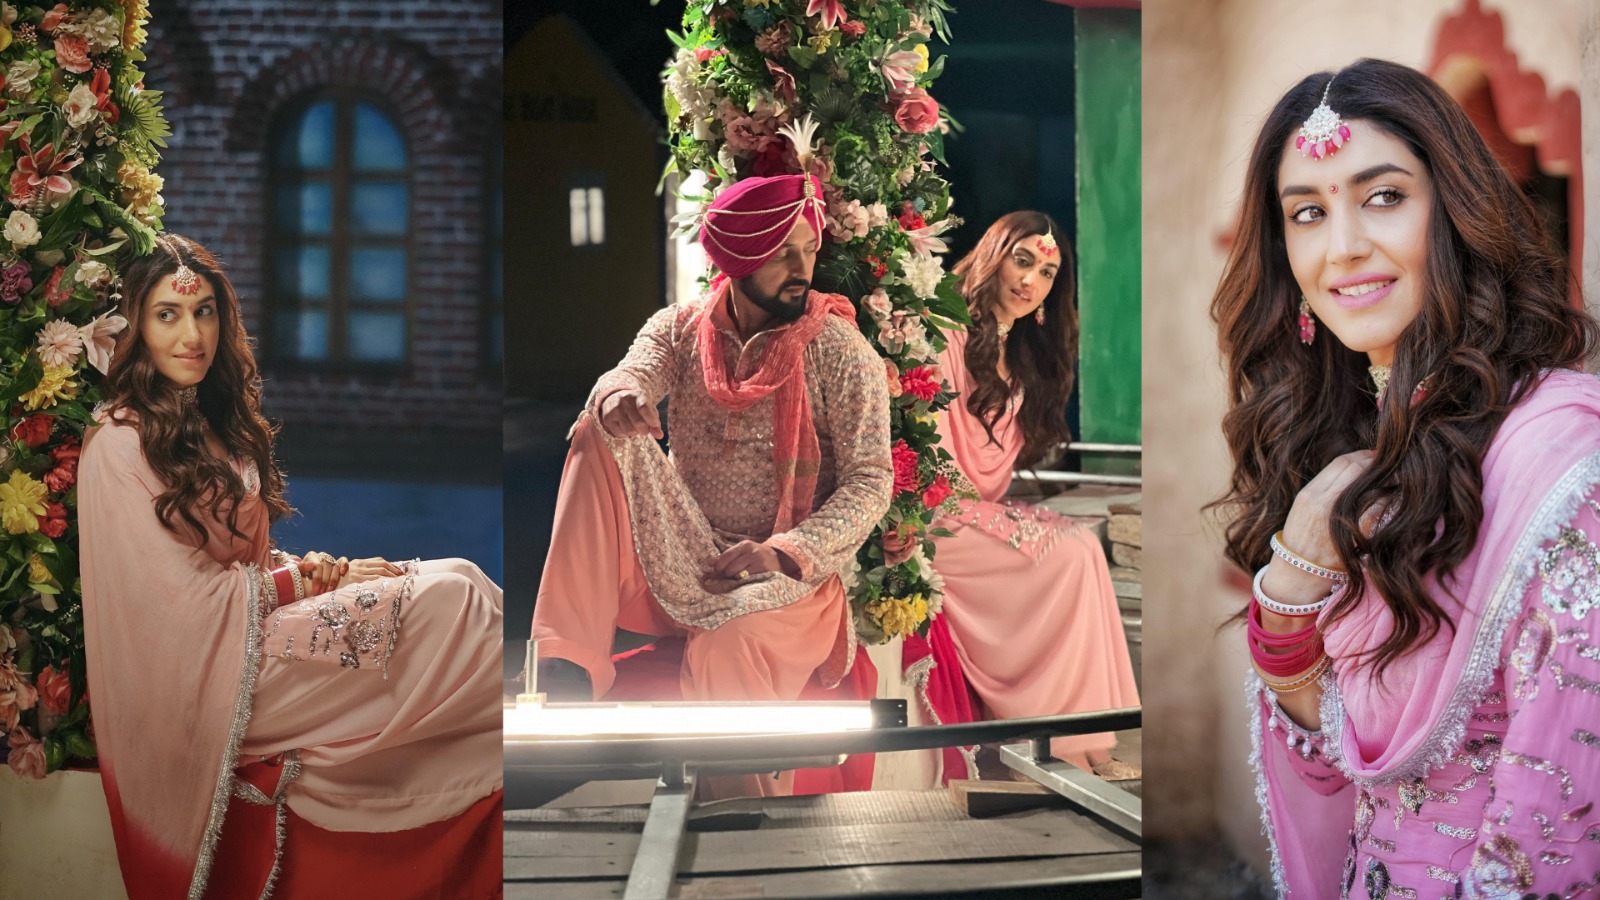 Delbar Arya Shoots For A Wedding Song In A Perfect Punjabi Kudi Look For Her Movie 